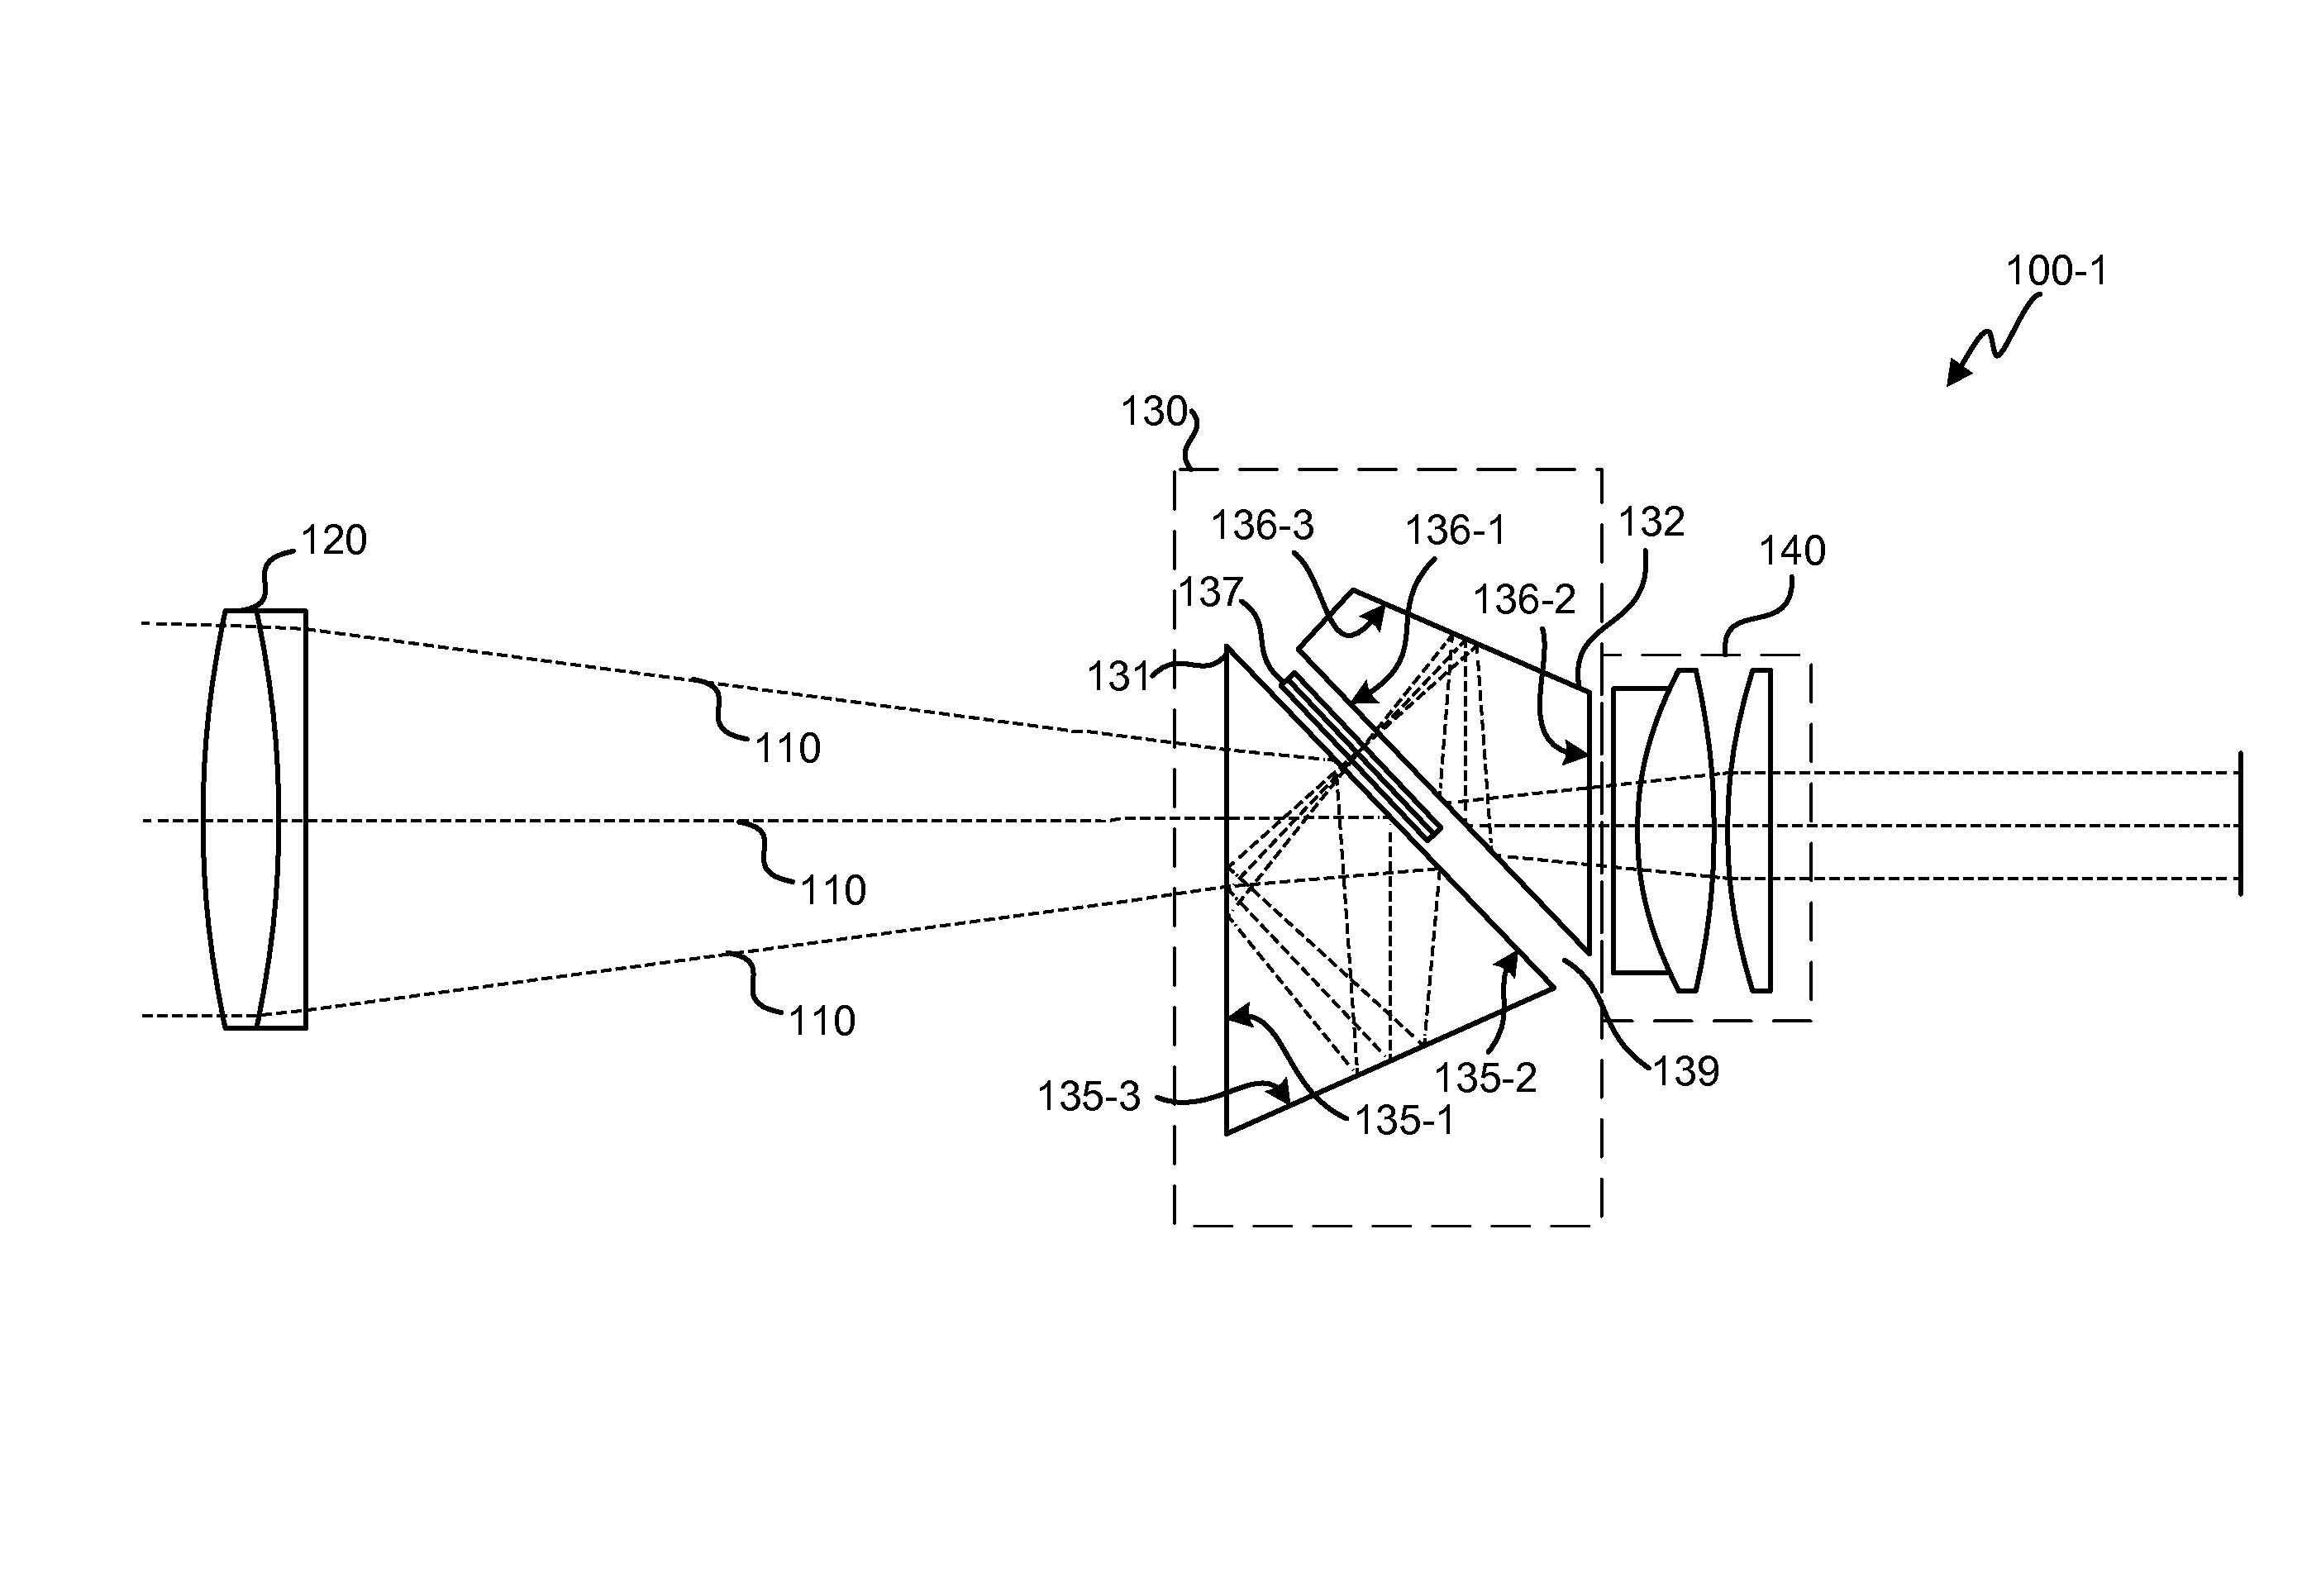 Integrated image erector and through-sight information display for telescope or other optical device